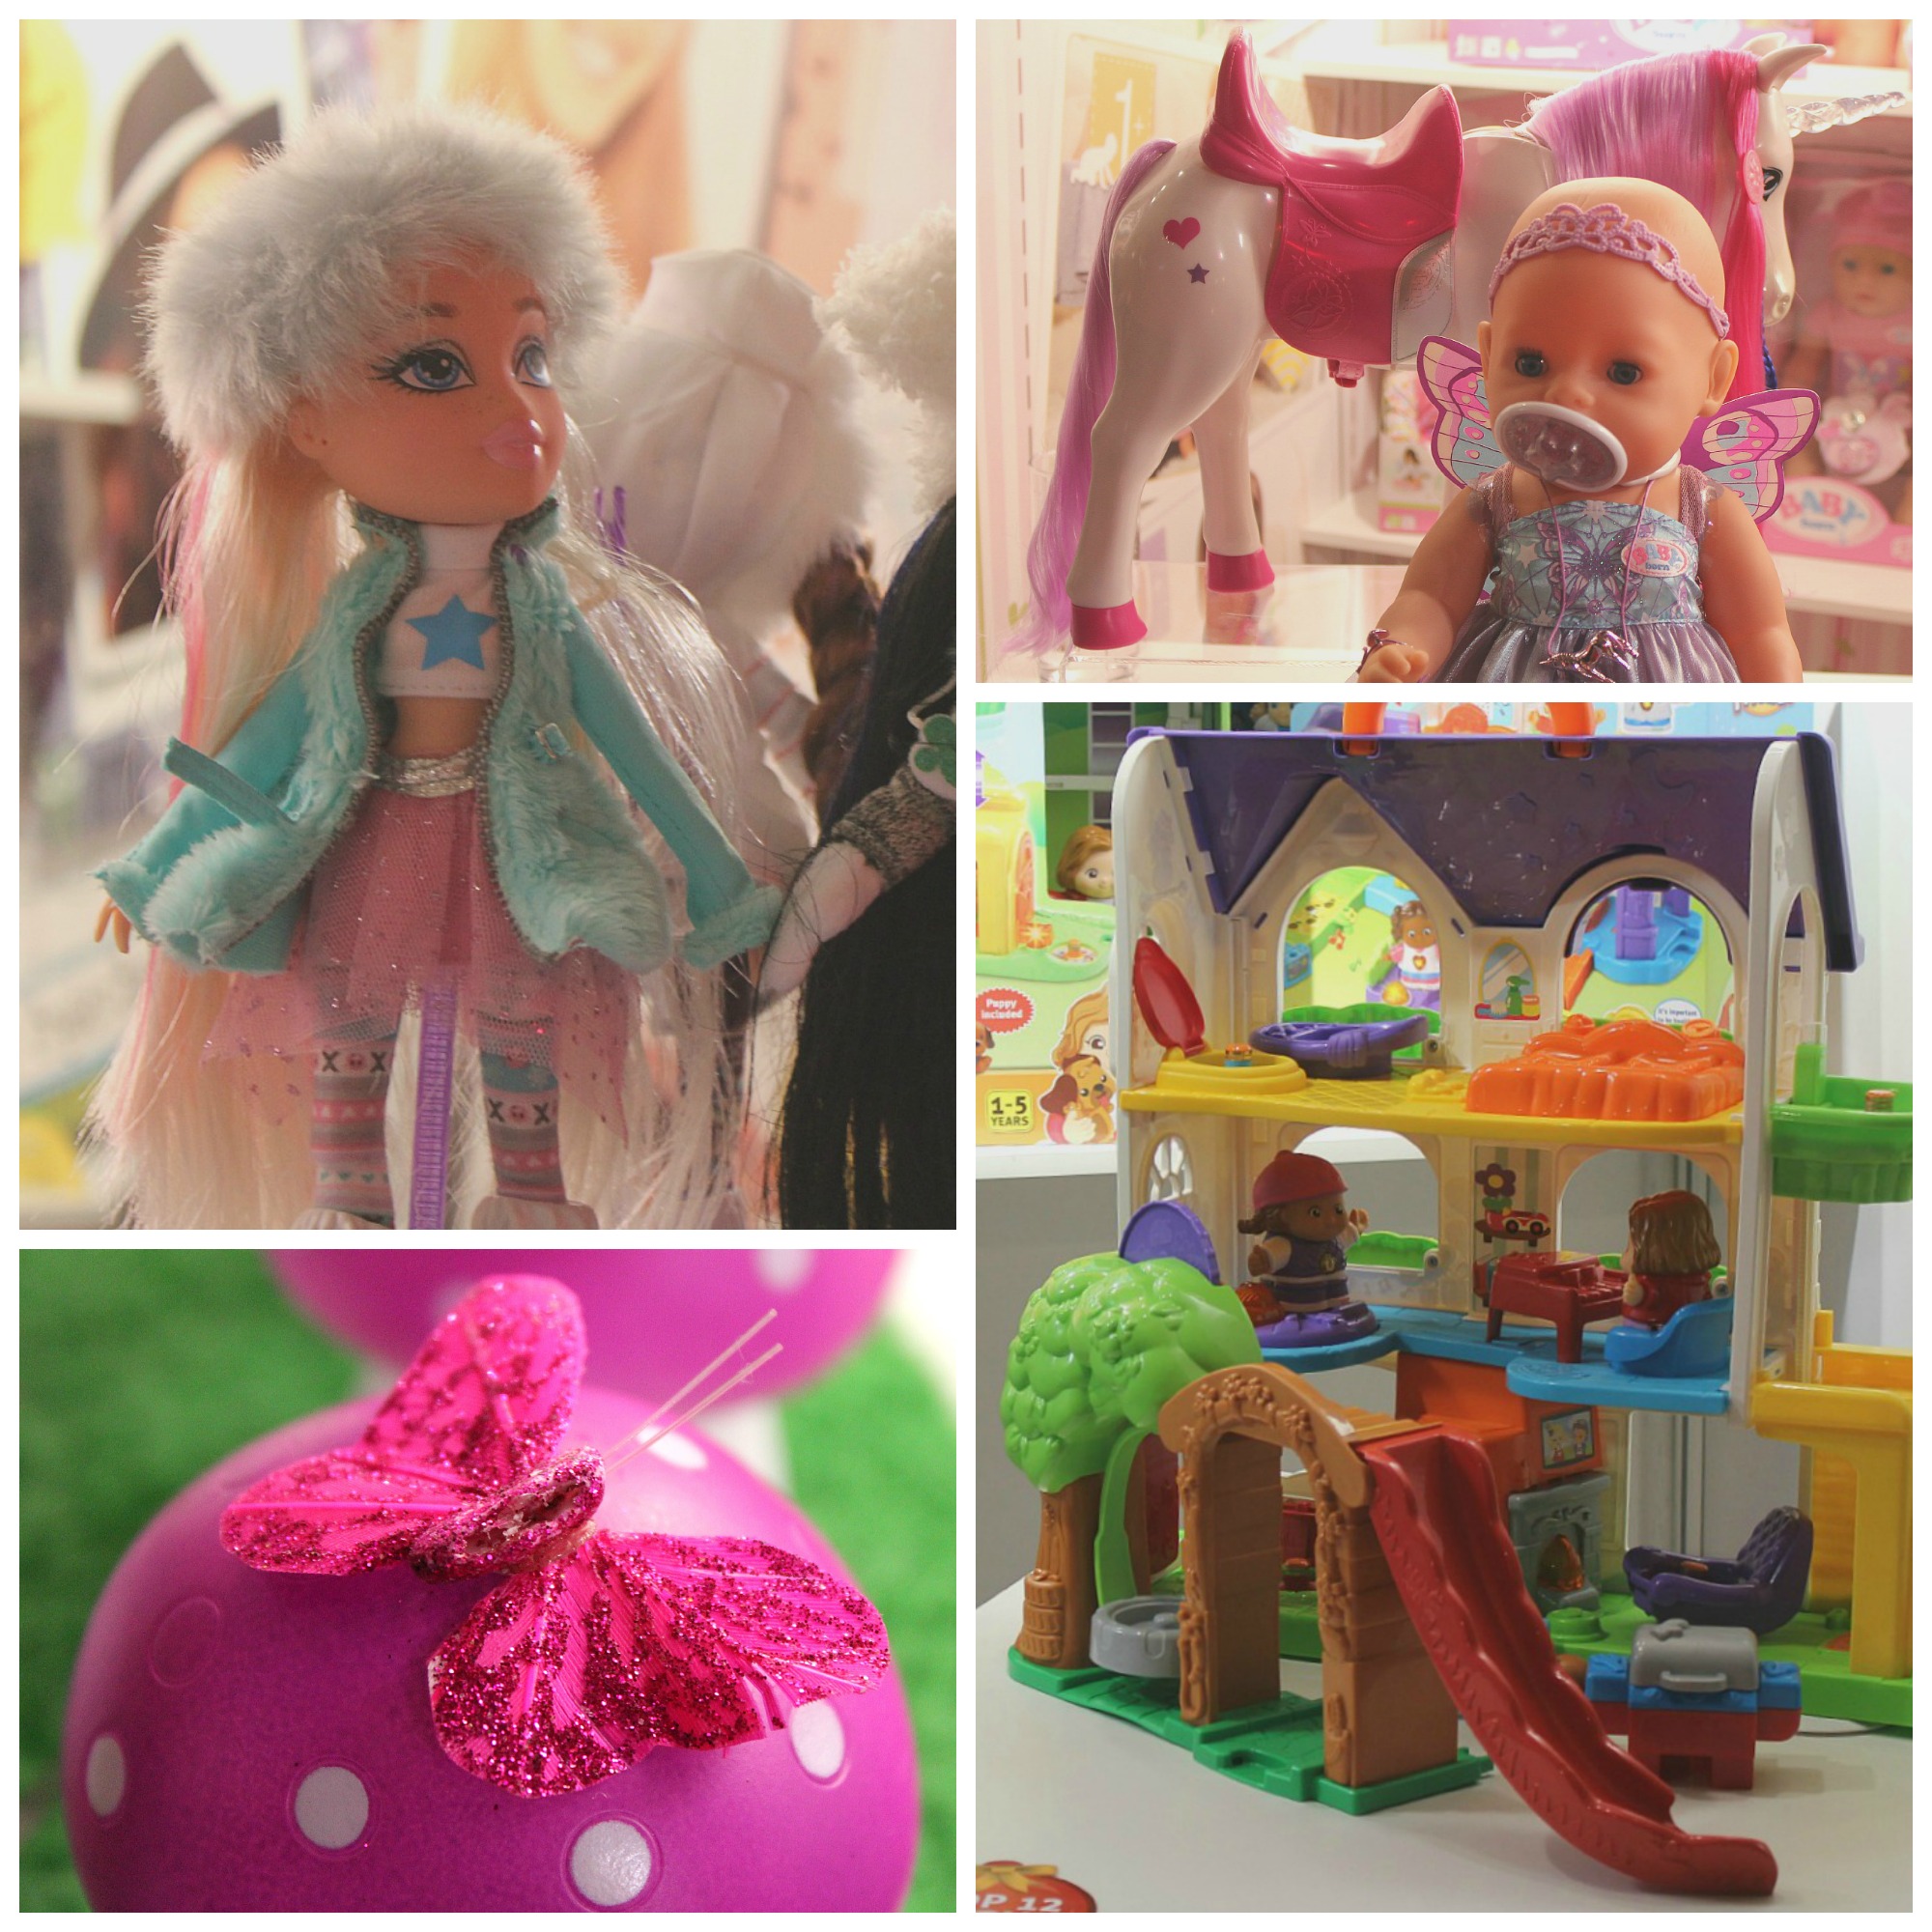 PODcast Dream Toys collage 4